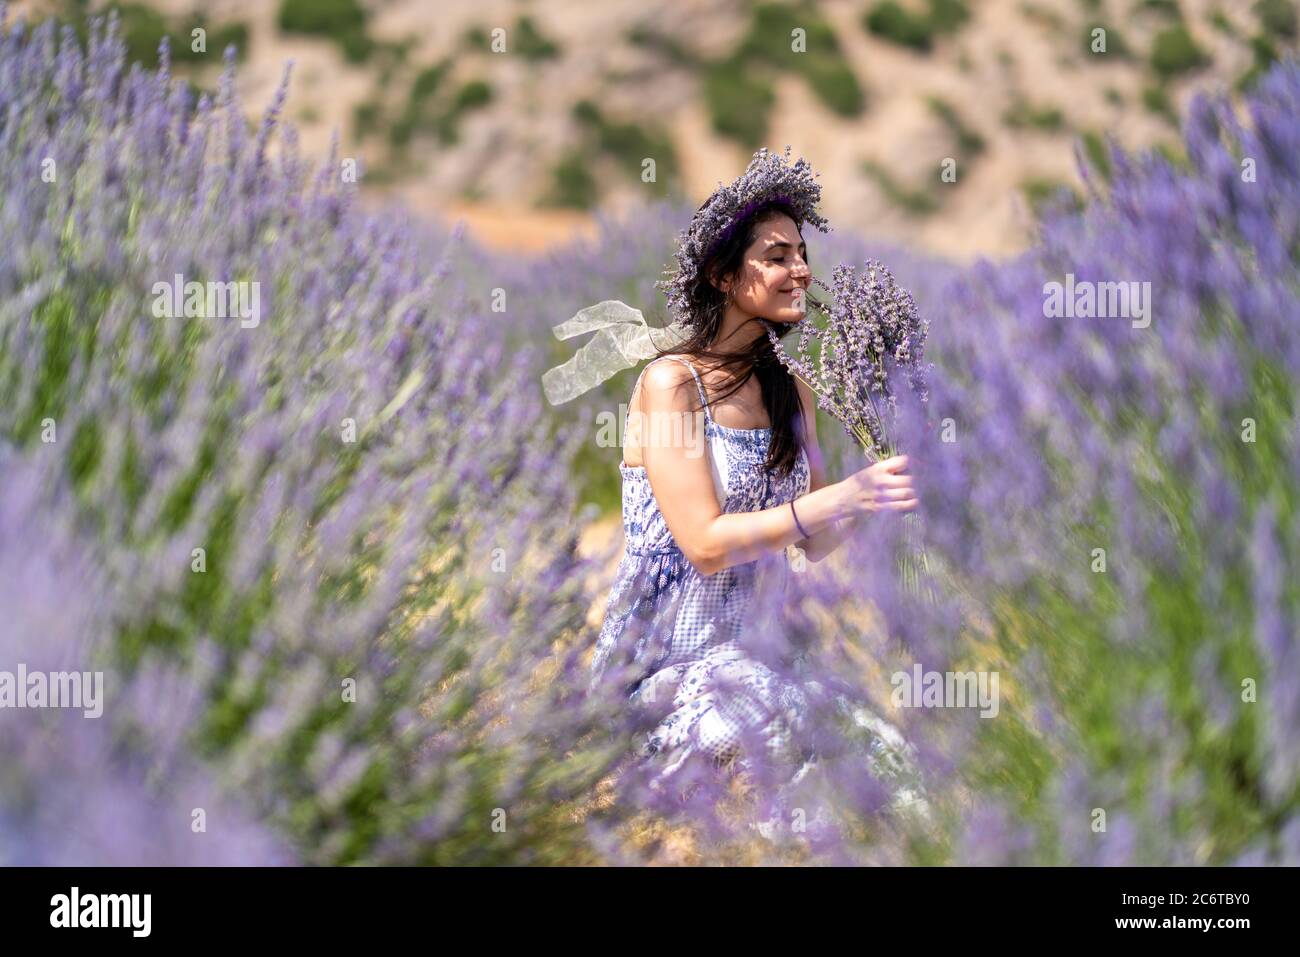 Young woman enjoying the view and the sunlight on her face on a rural flower field with lavender blossoms. High quality photo Stock Photo